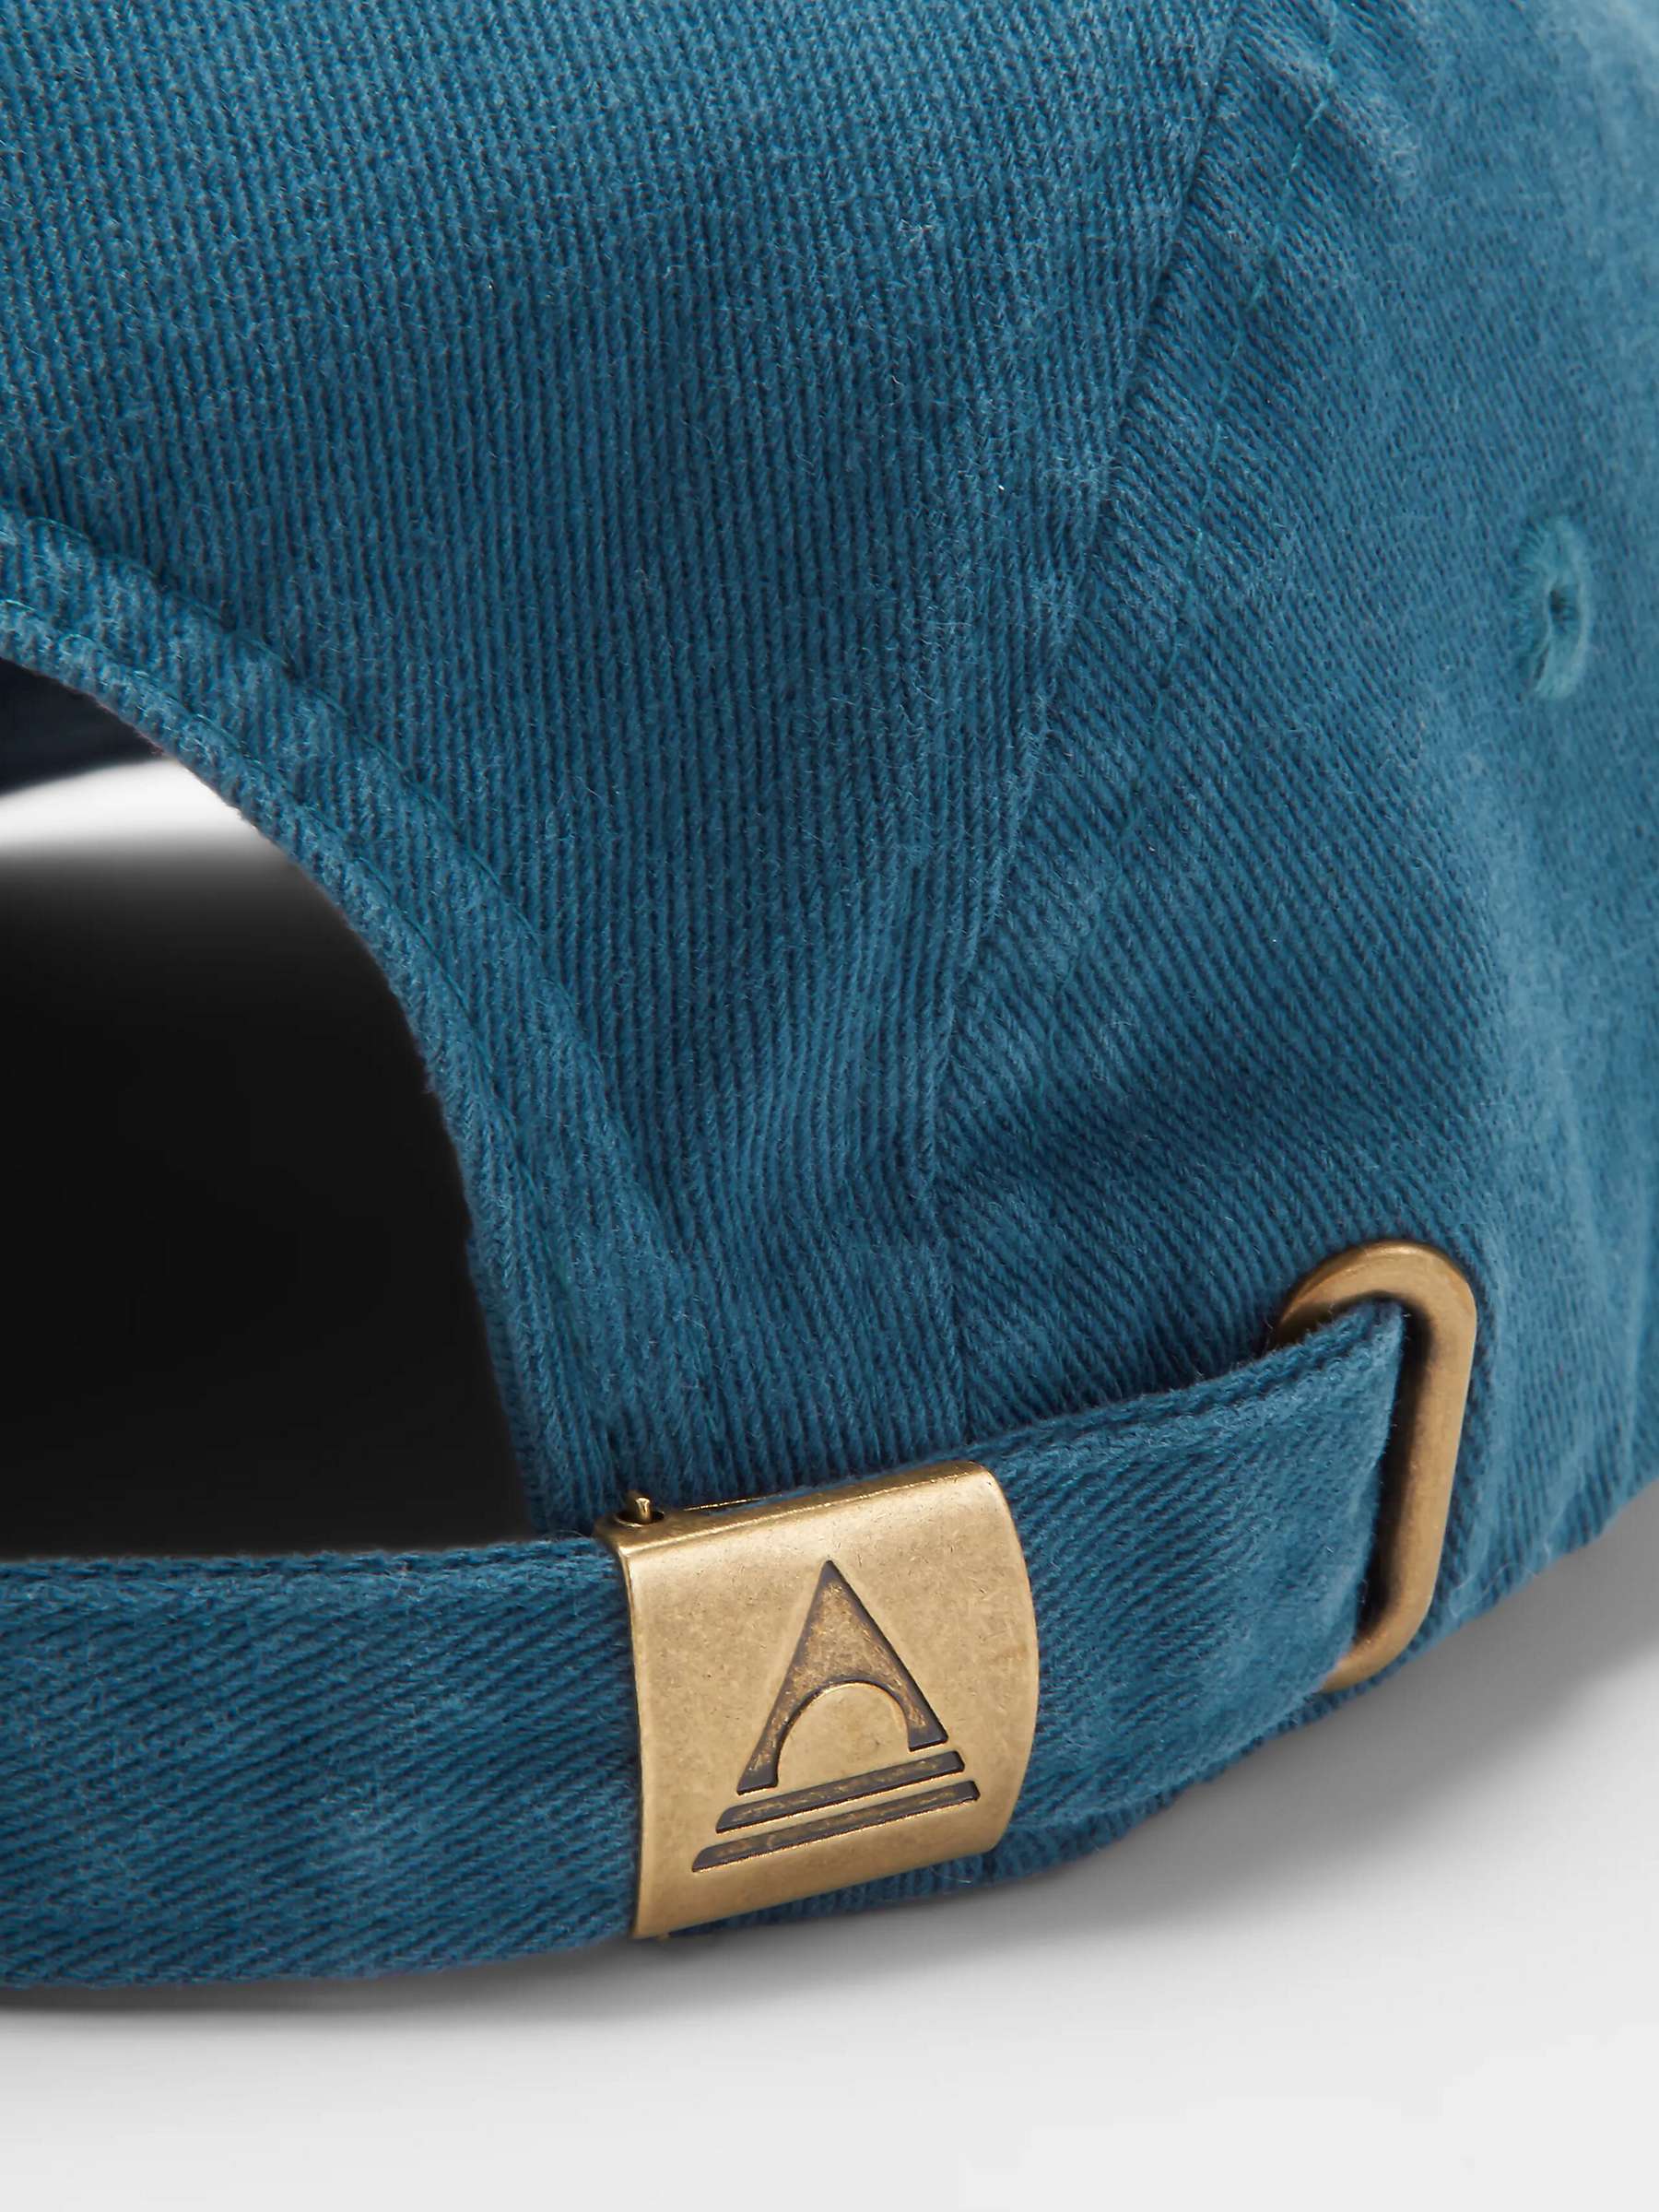 Buy Passenger Fixie Recycled Cotton Twill Cap, Tidal Blue Online at johnlewis.com